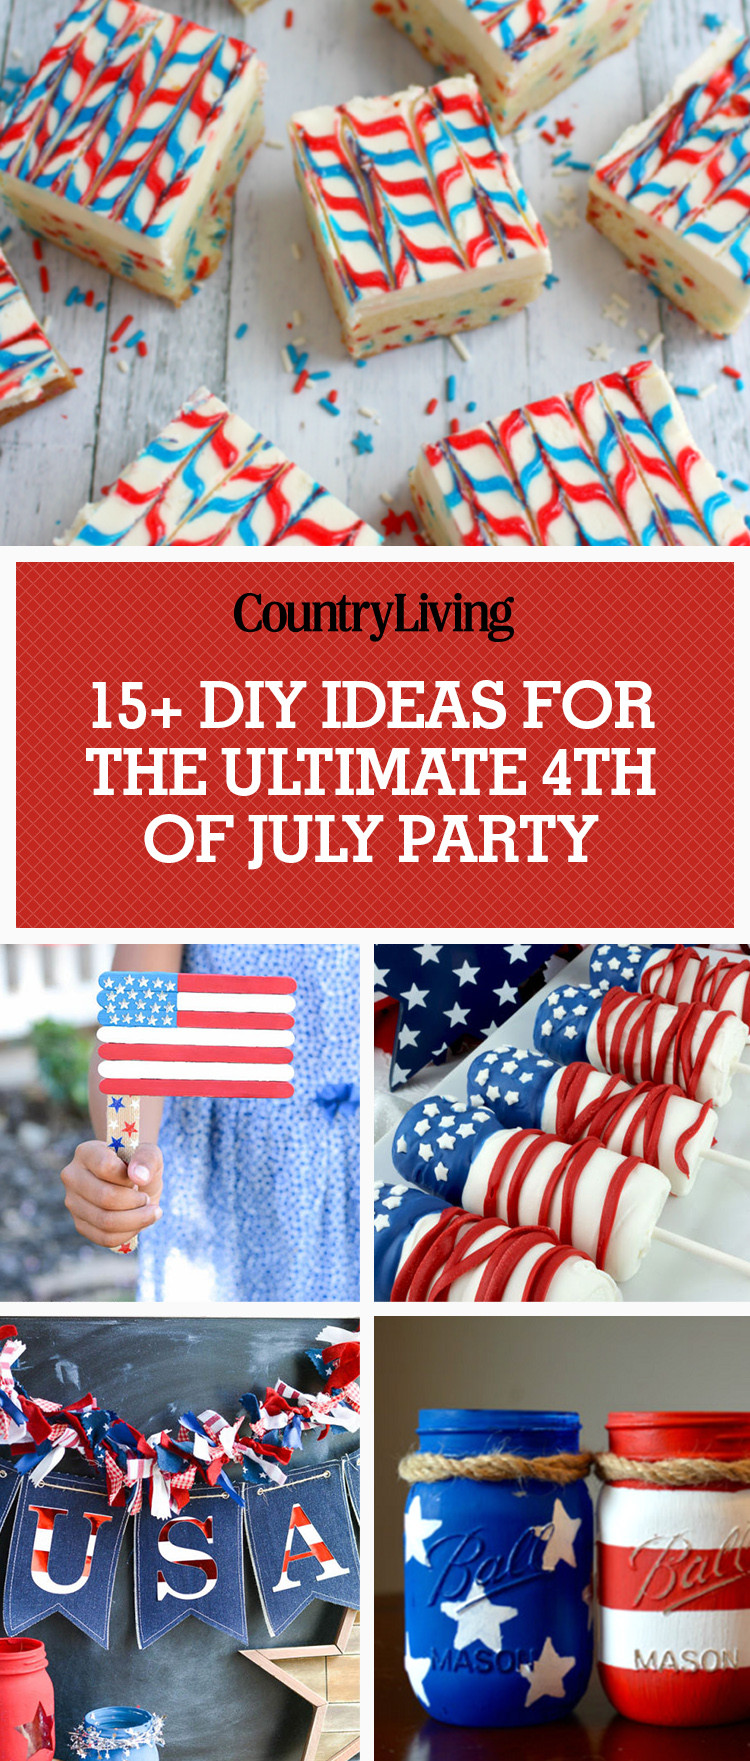 4th Of July Party
 16 Best 4th of July Party Ideas Games & DIY Decor for a